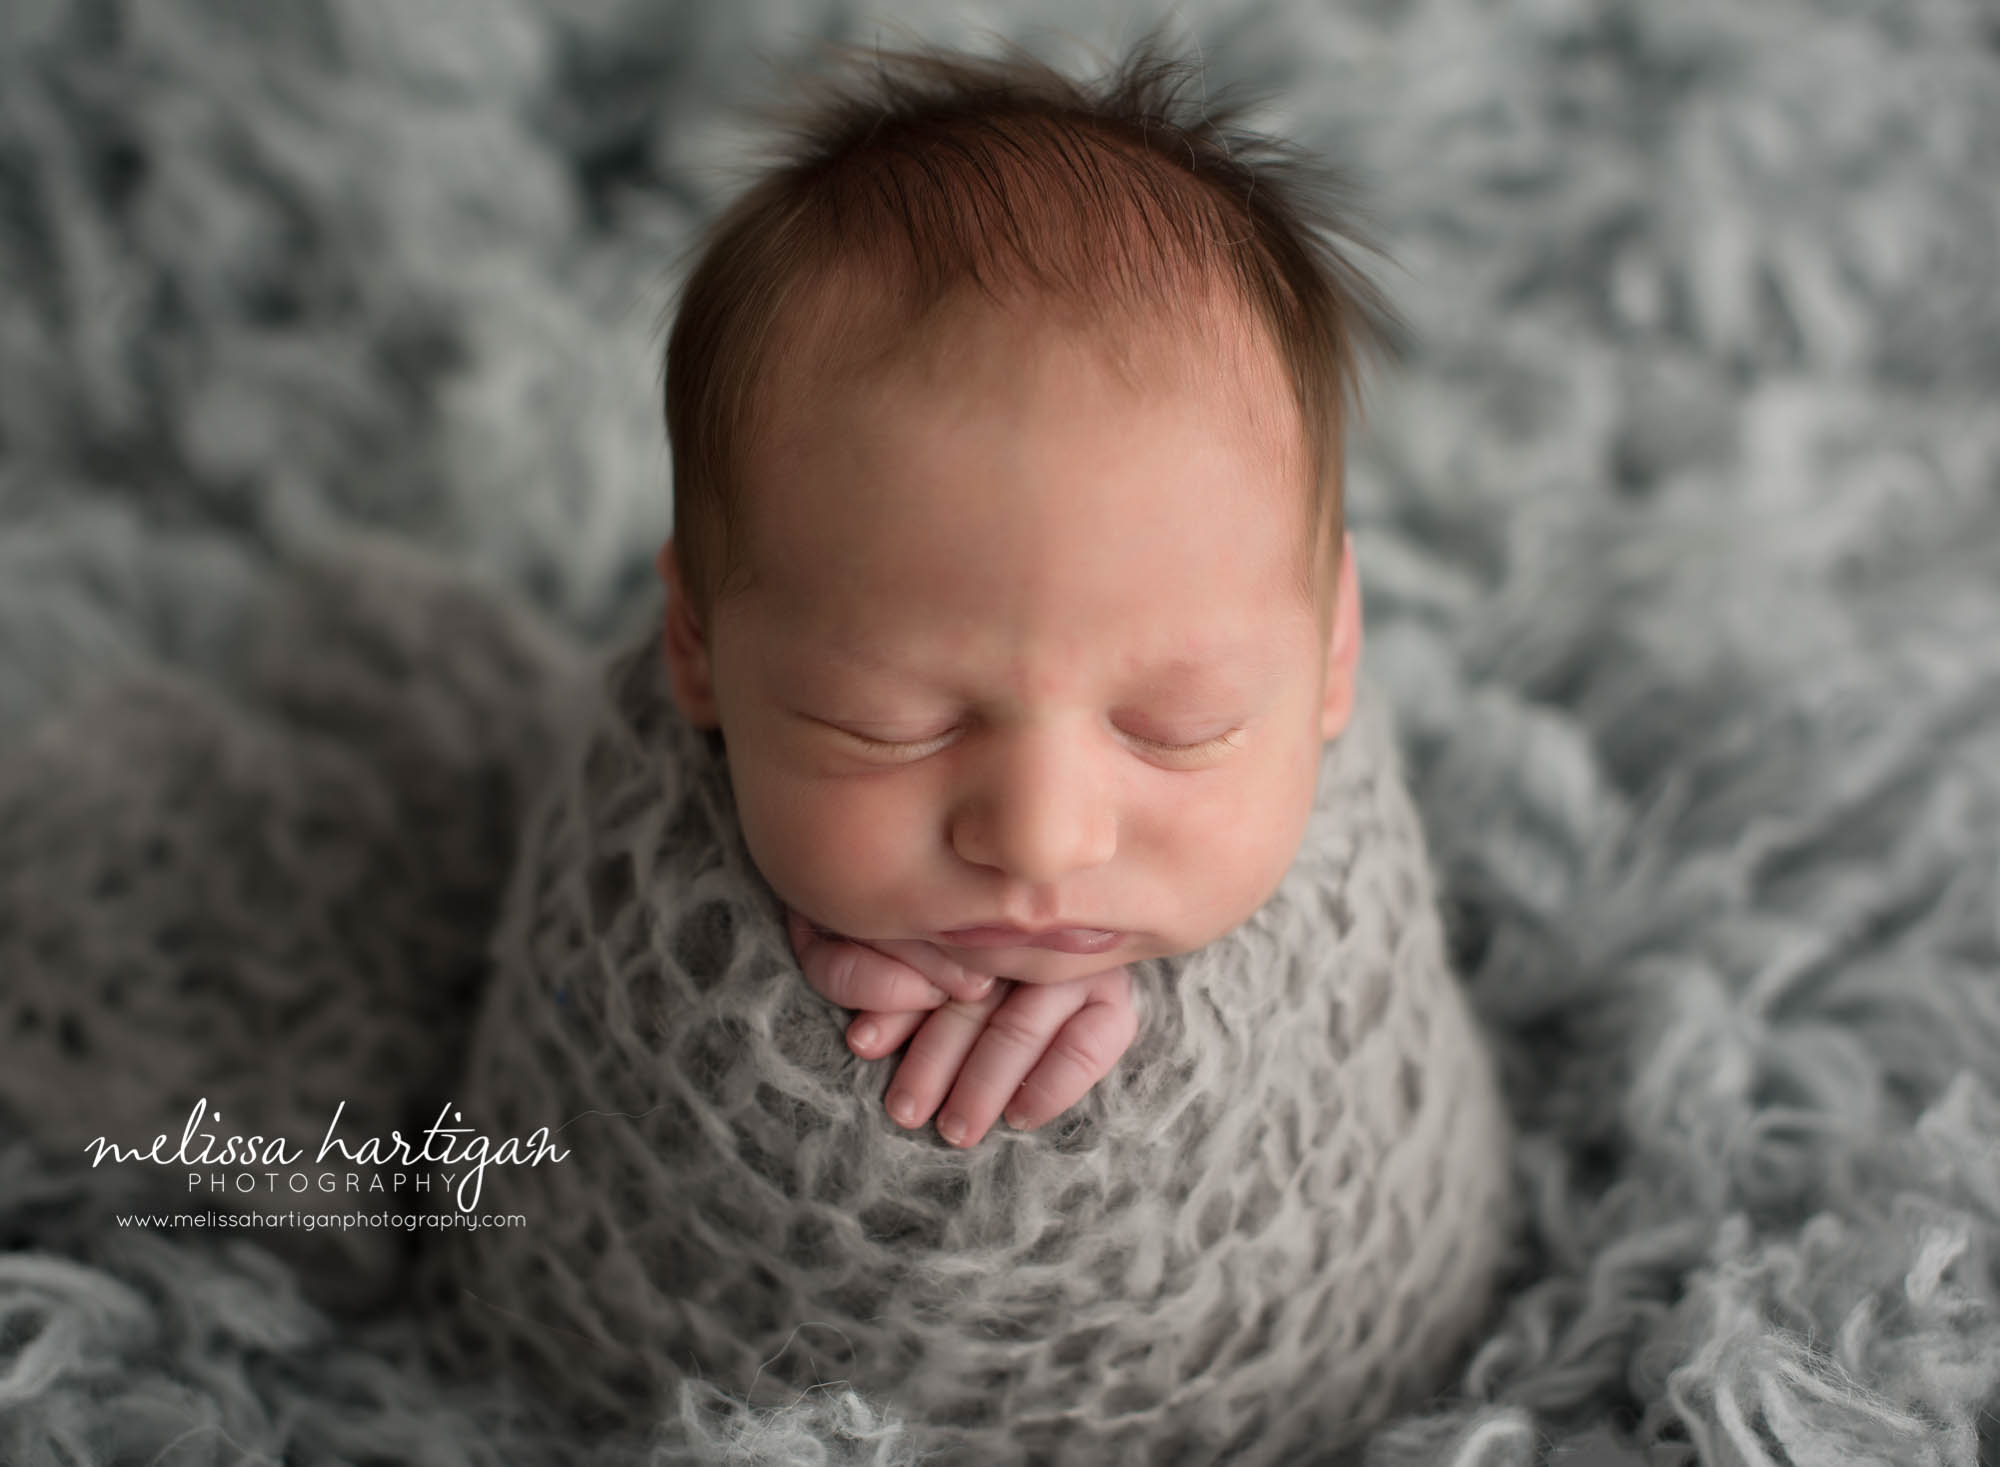 Newborn Photographer Connecticut newborn pose baby sleeping wrapped in gray knit wrap